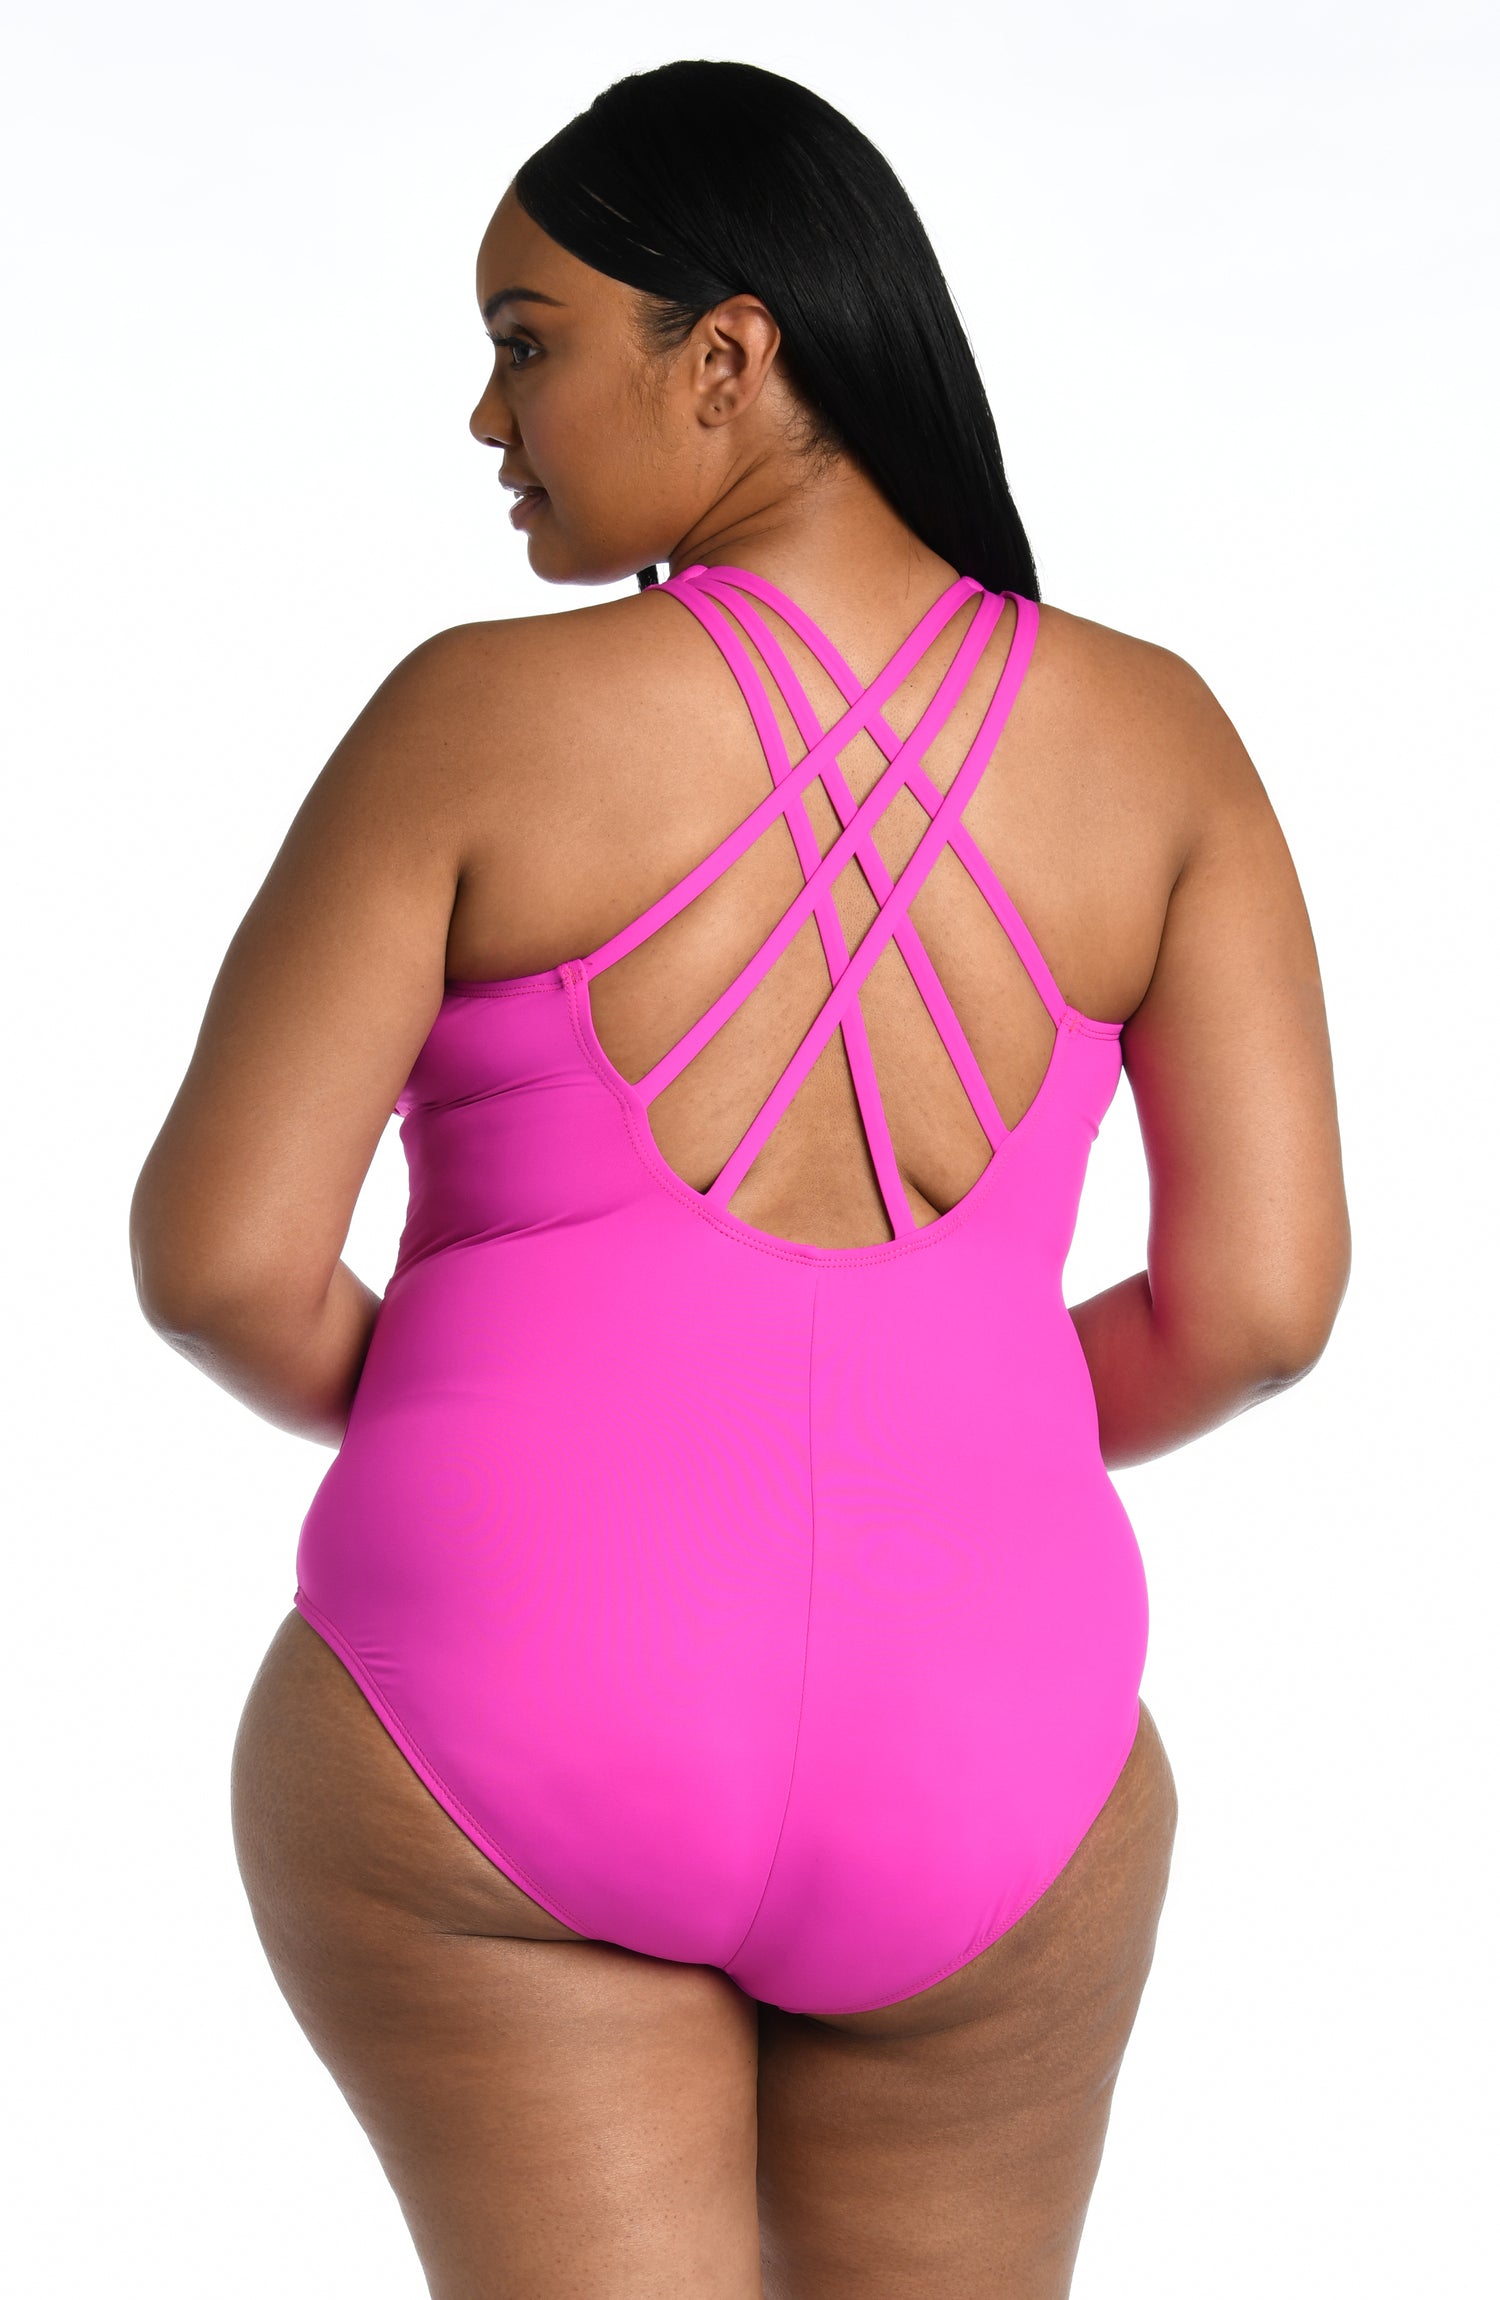 Model is wearing a orchid colored one piece swimsuit from our Best-Selling Island Goddess collection.